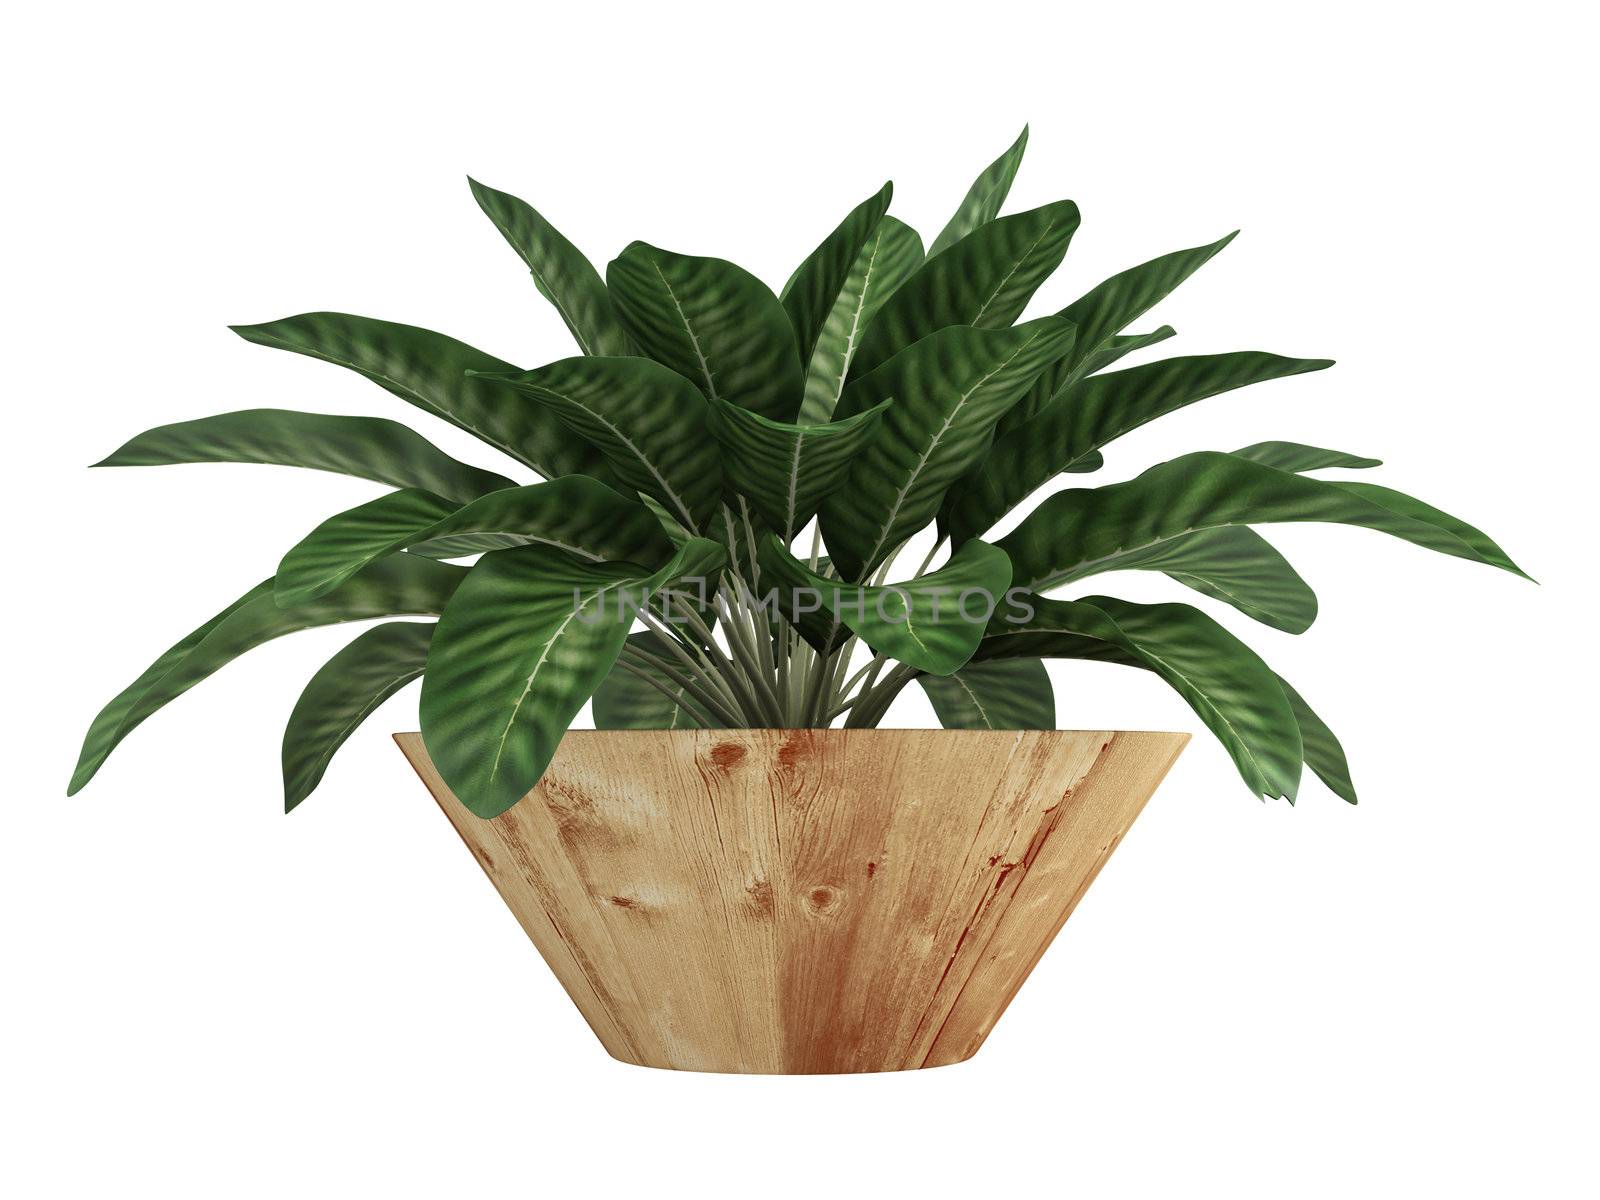 Dieffenbachia with variegated leaves growing in a wooden container as an ornamental houseplant isolated on white